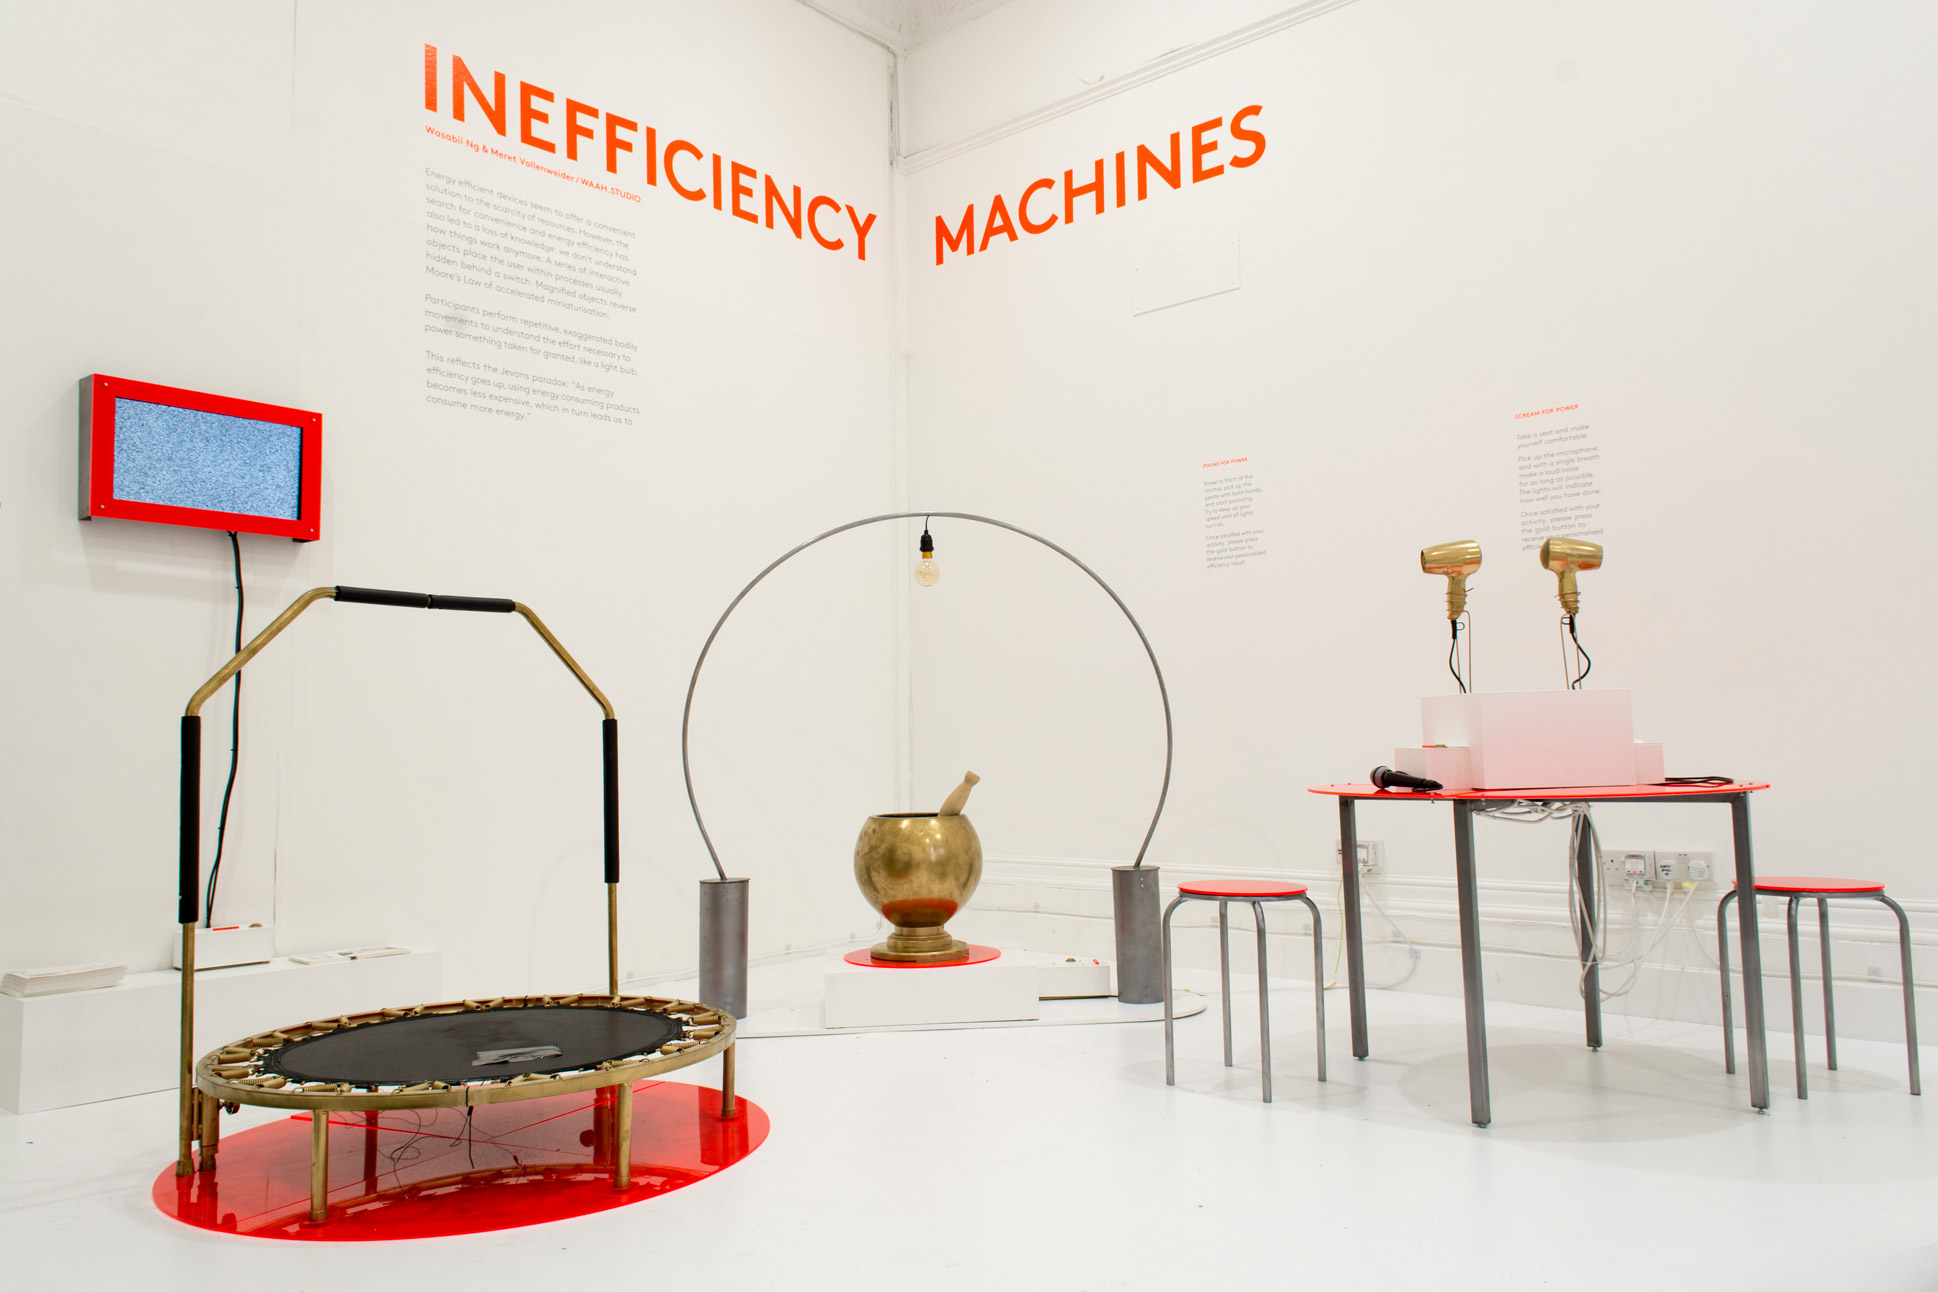 Inefficiency Machines installation by Meret Vollenweider and Wasabii Ng